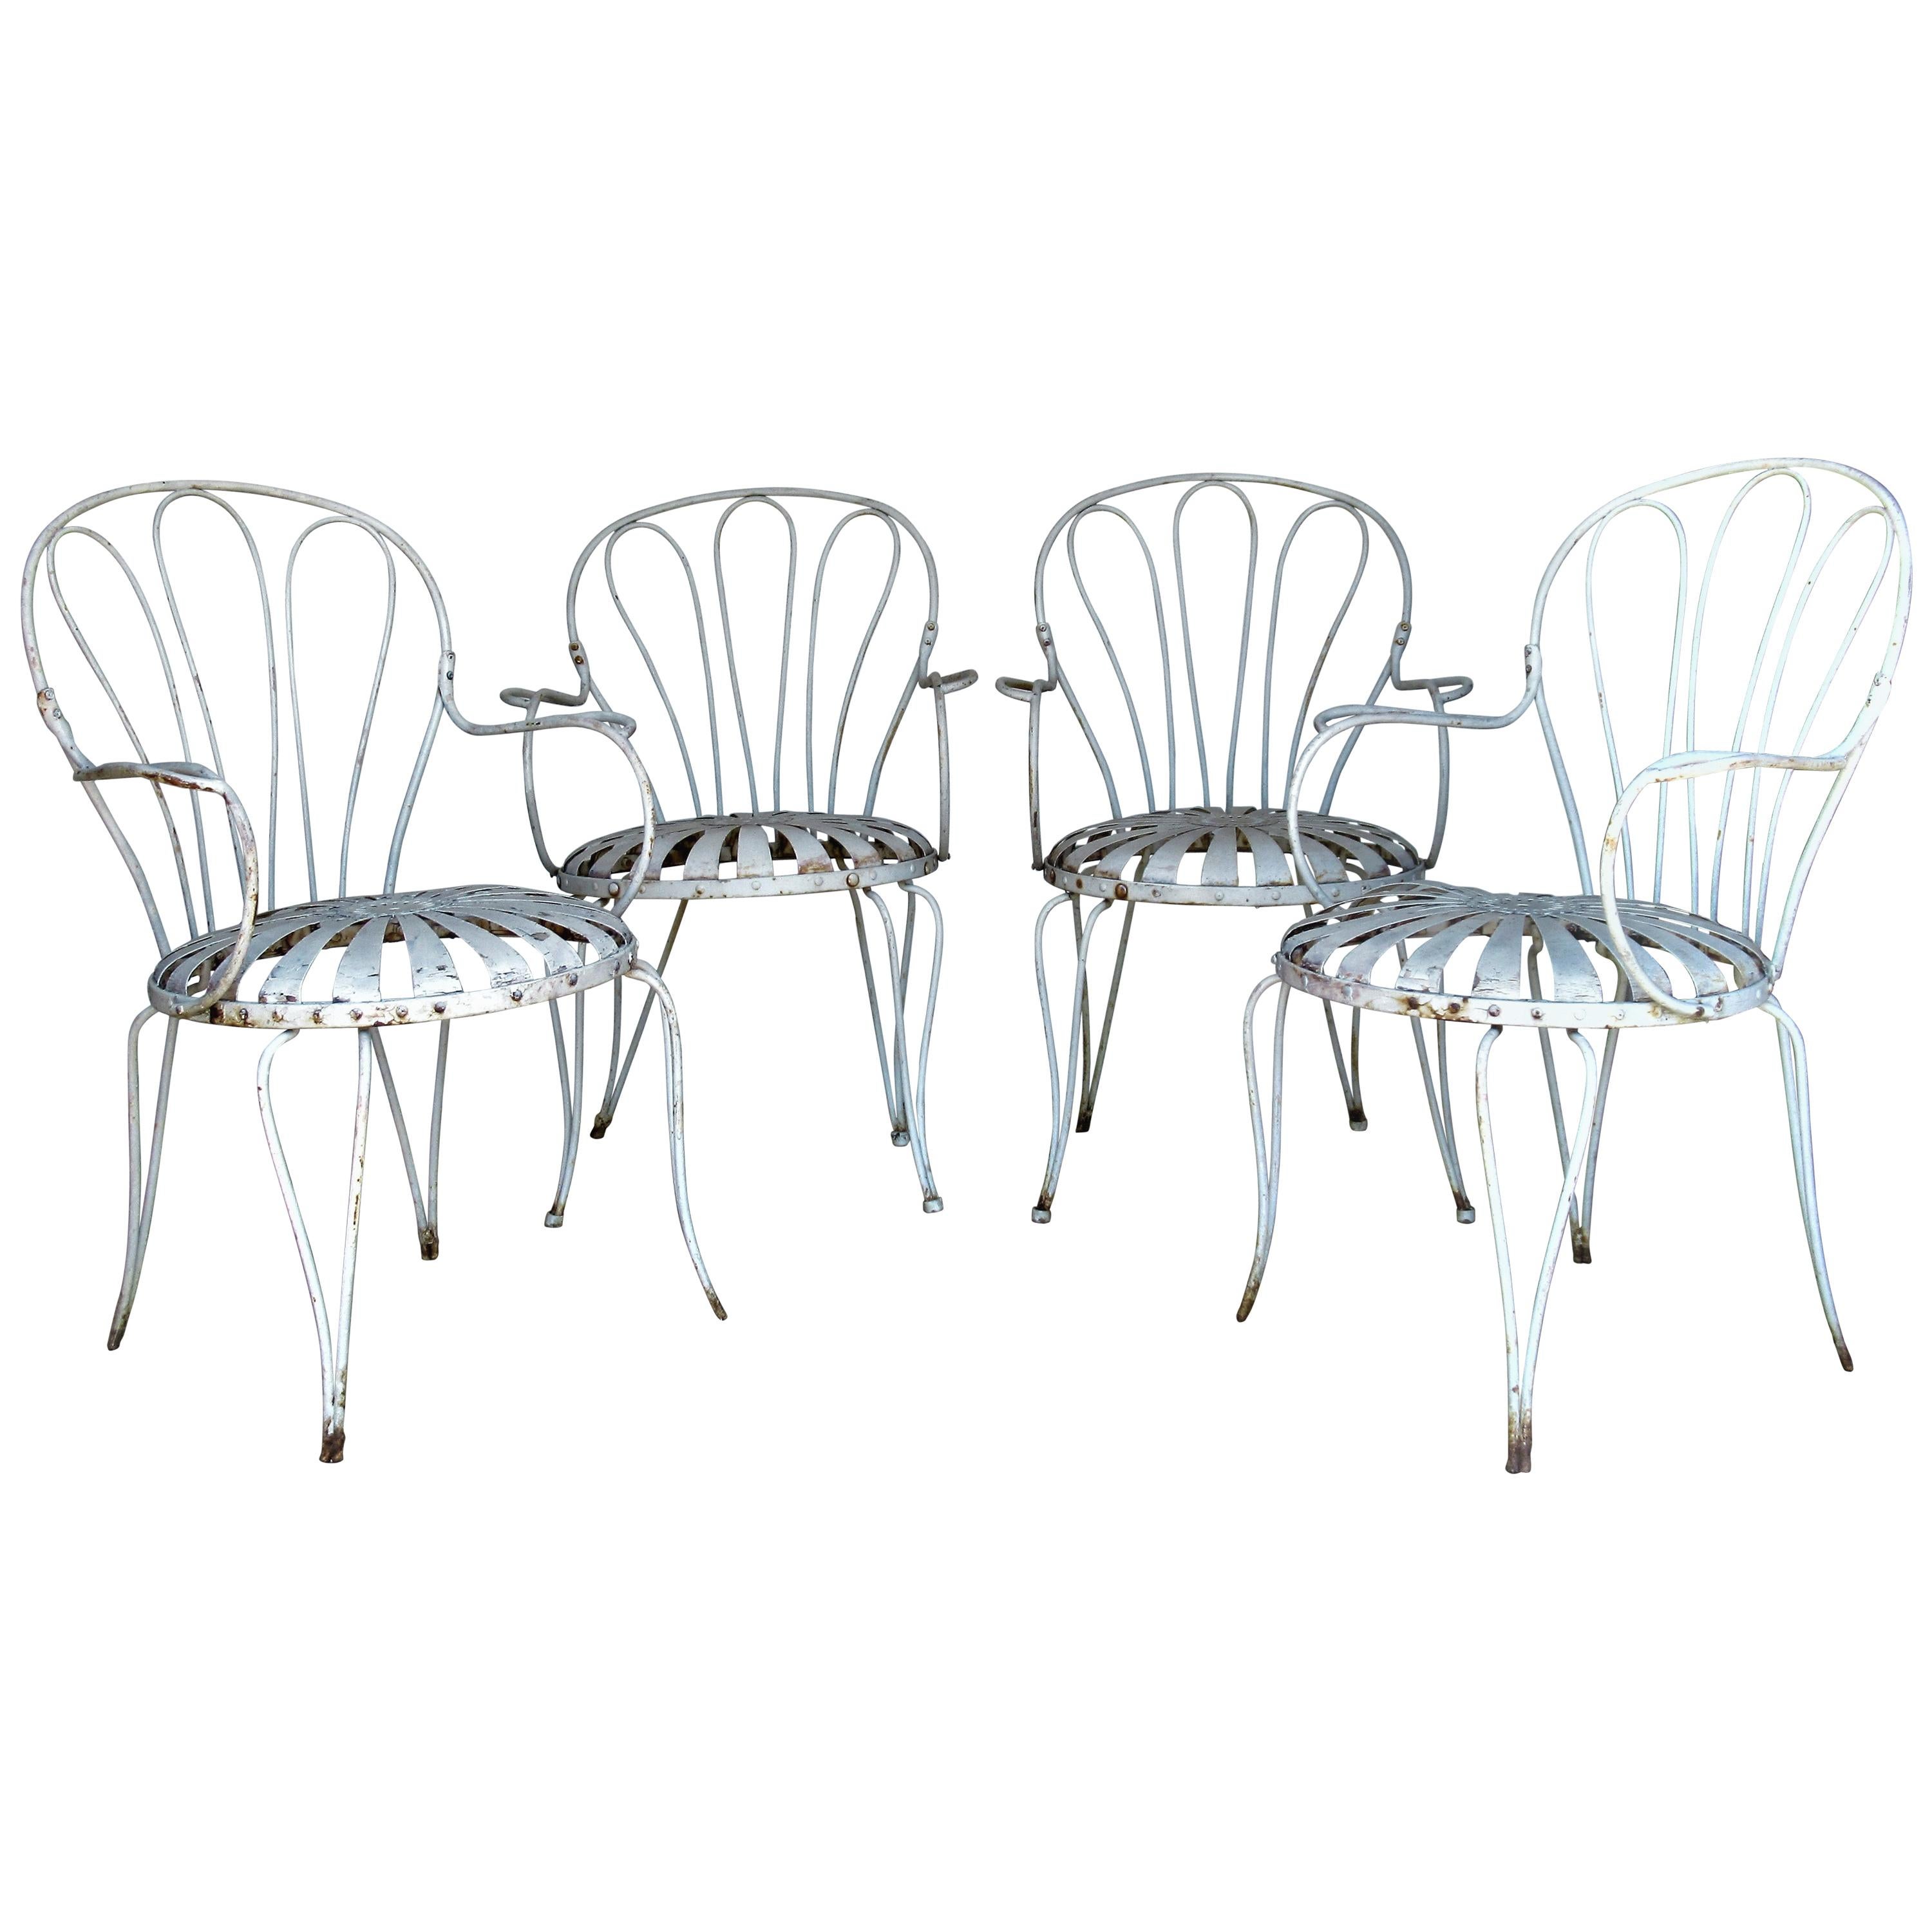 Francois Carre Iron Garden Chairs